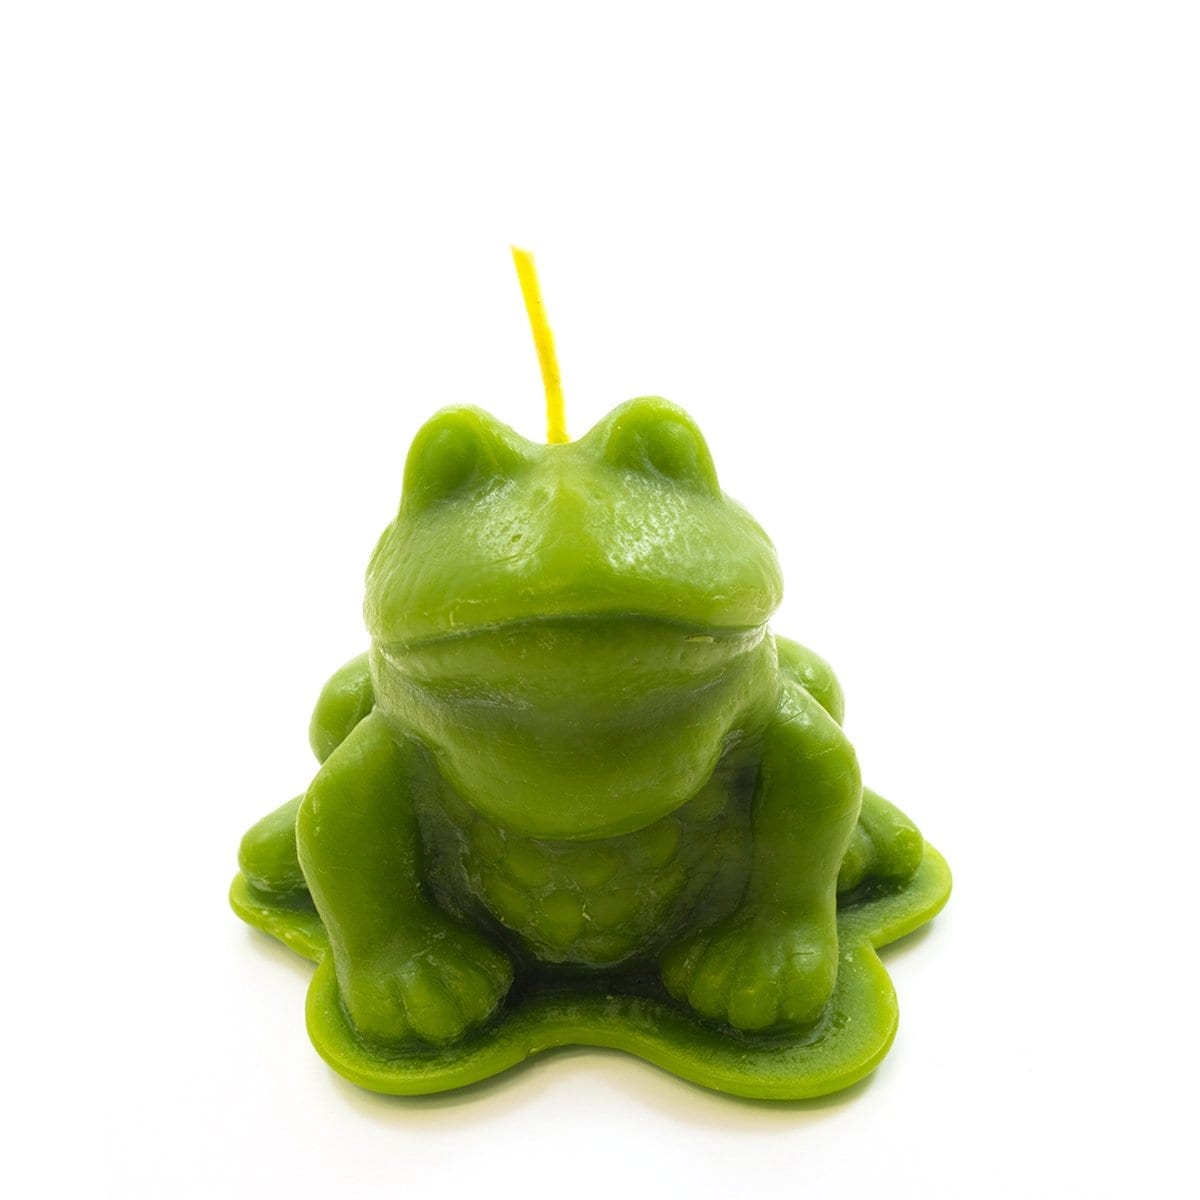 Beeswax candles Natural candles. Toy candle Set of 5 frog candles